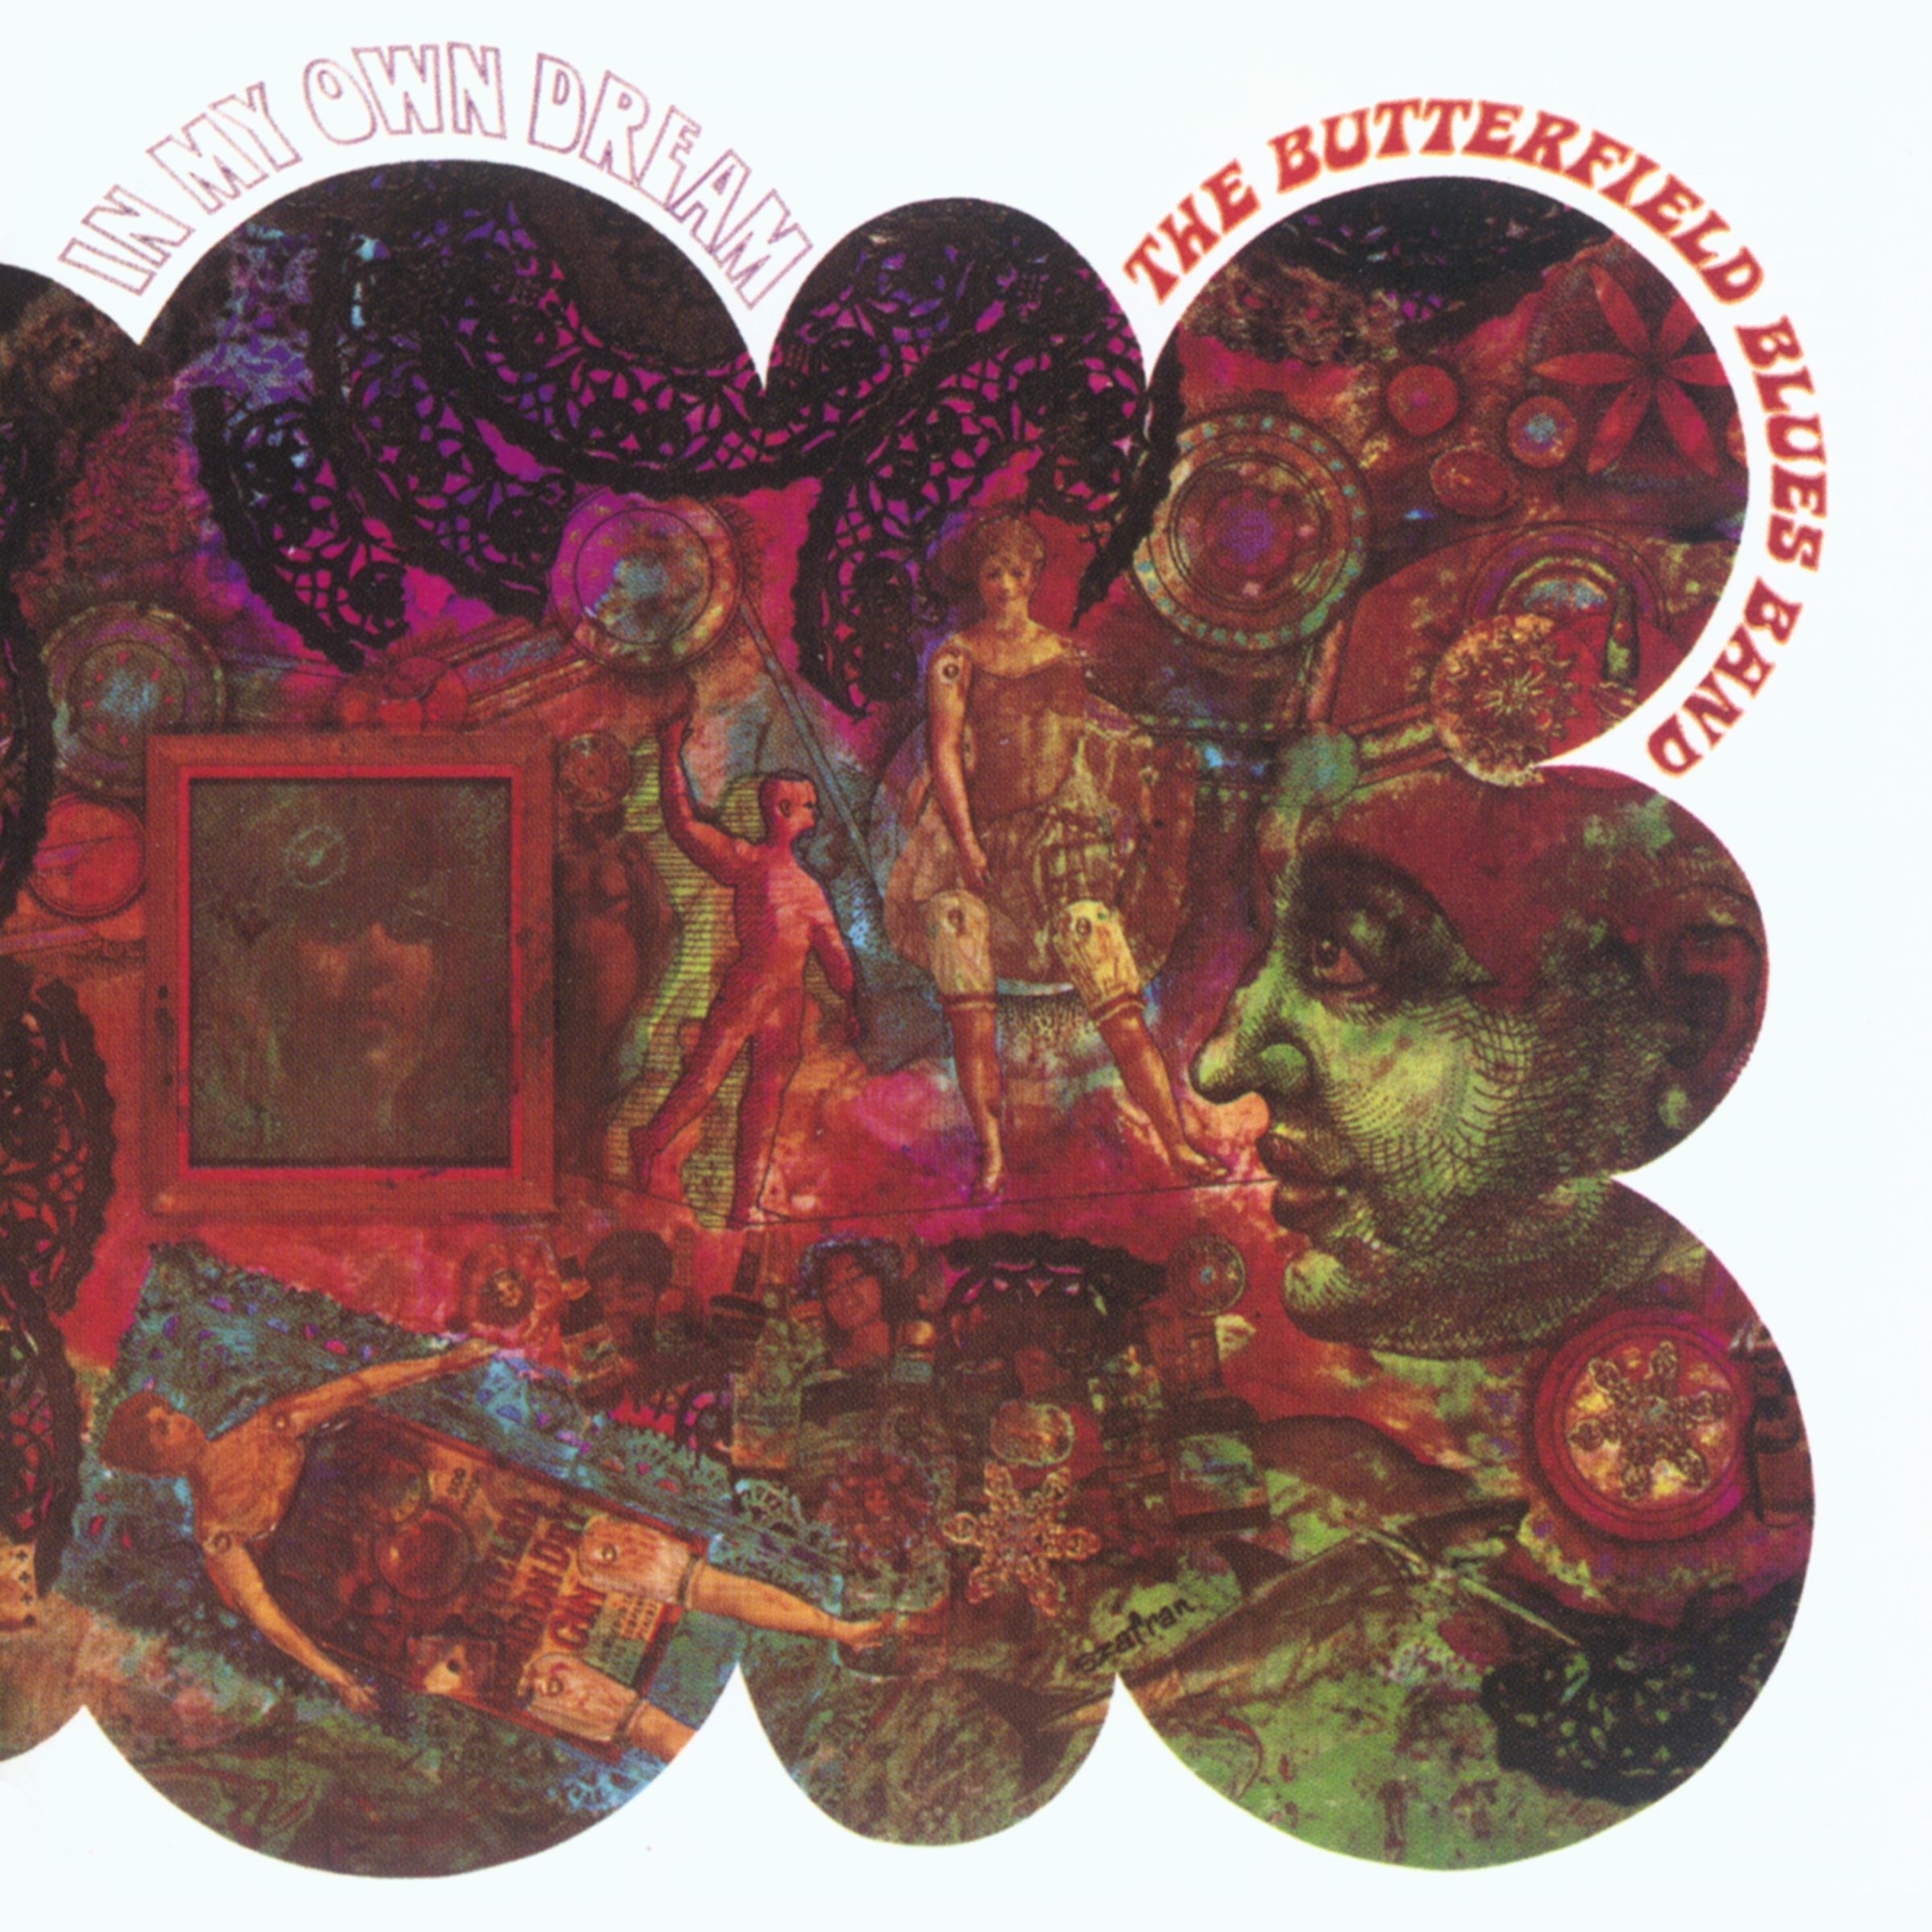 The Paul Butterfield Blues Band – In My Own Dreams